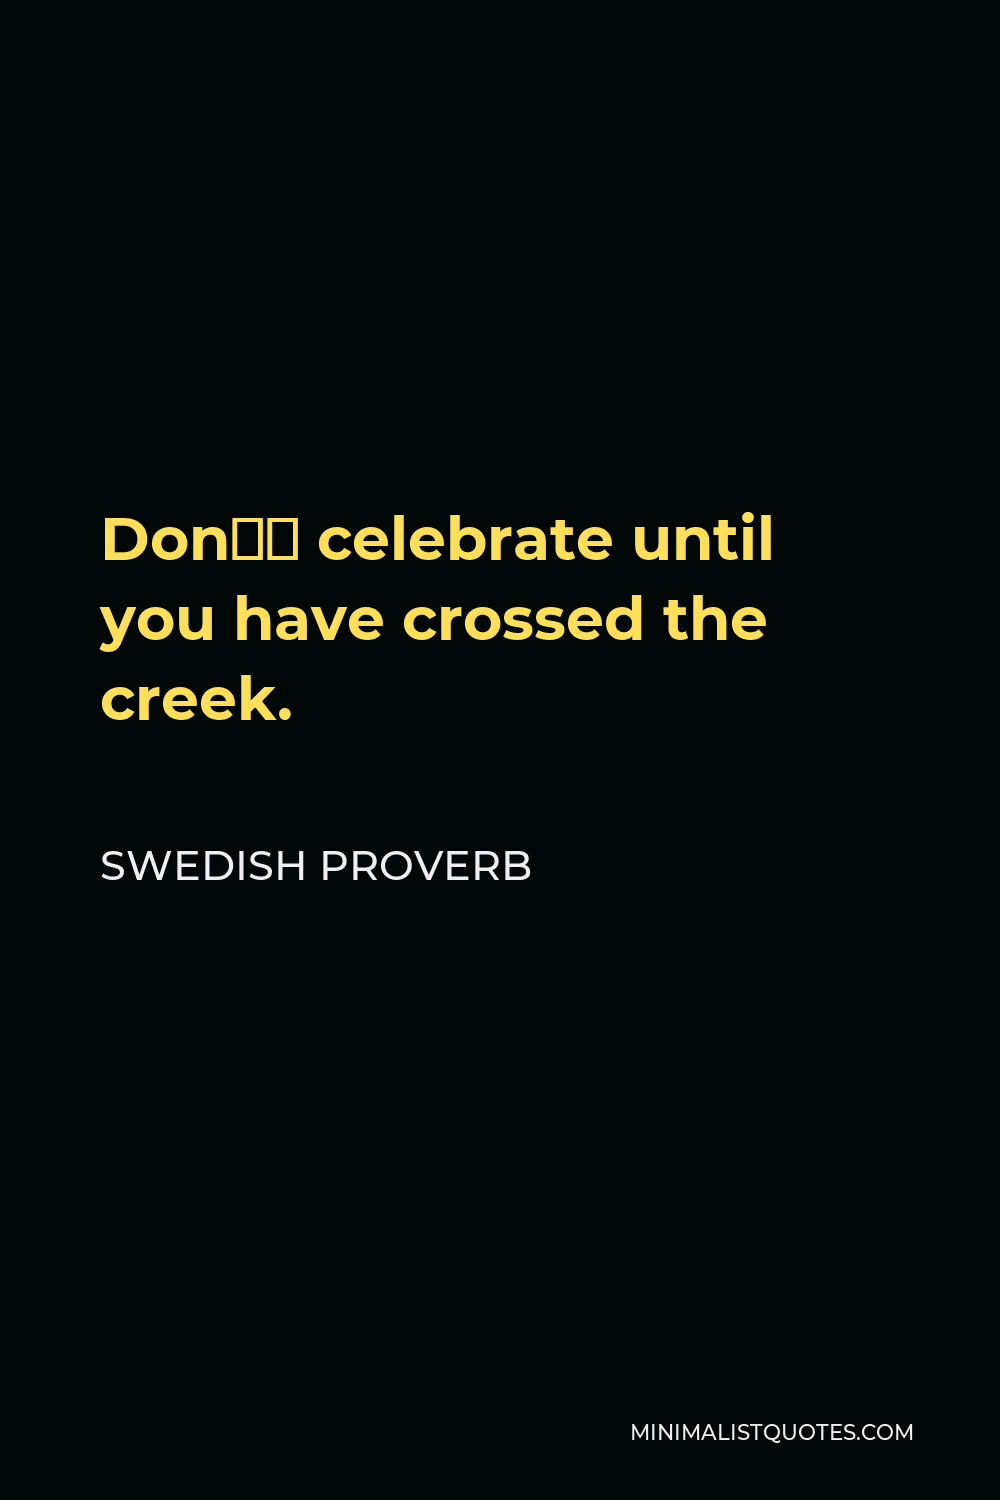 Swedish Proverb Quote - Don’t celebrate until you have crossed the creek.